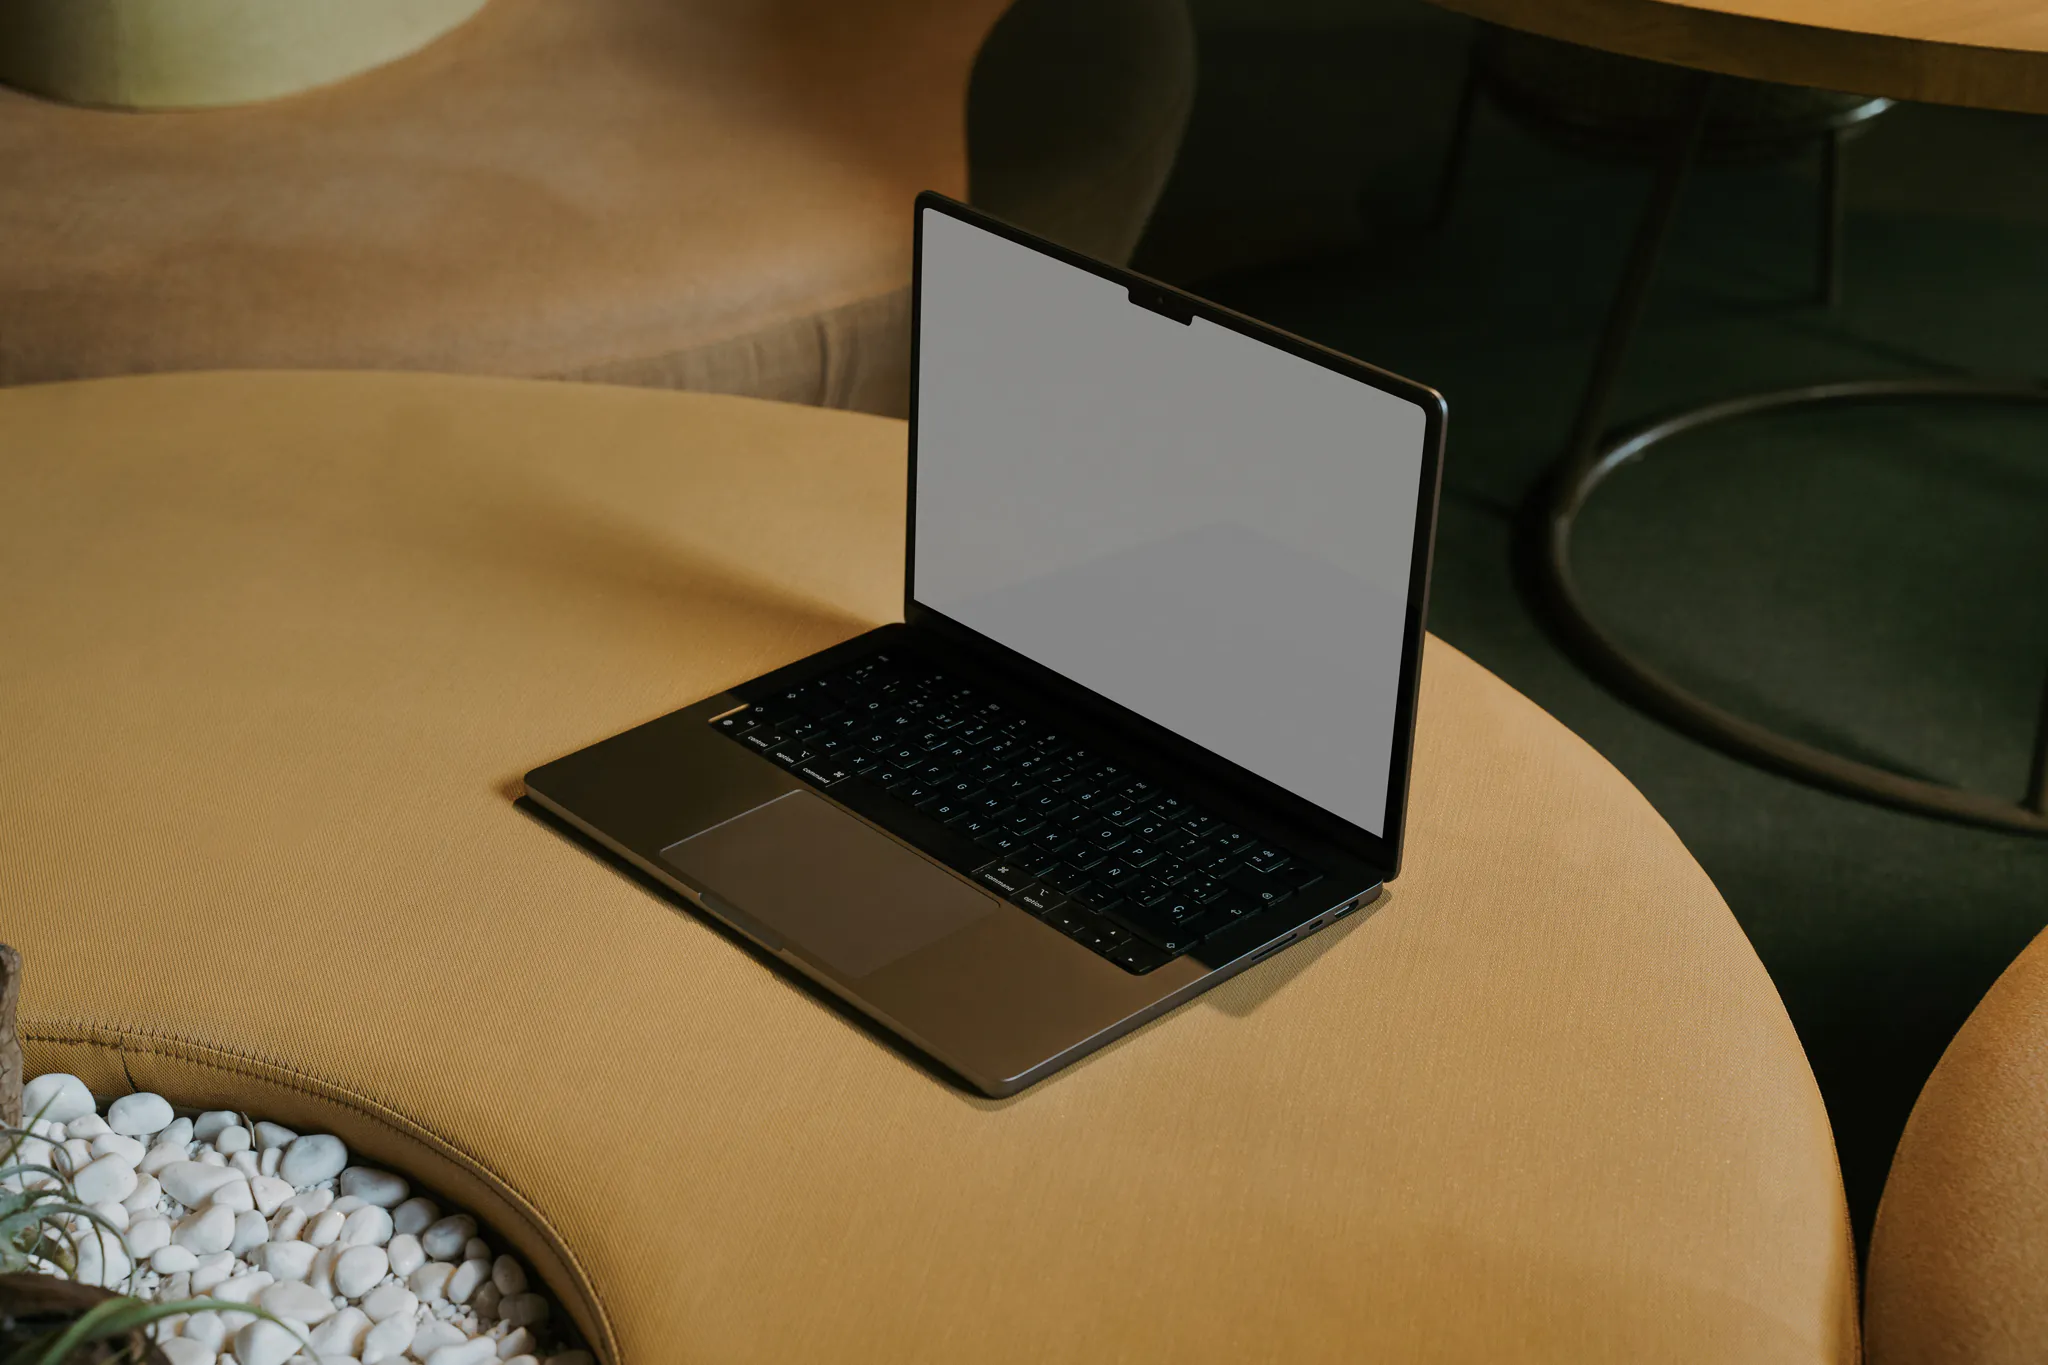 Macbook Pro mockup over a round yellow couch